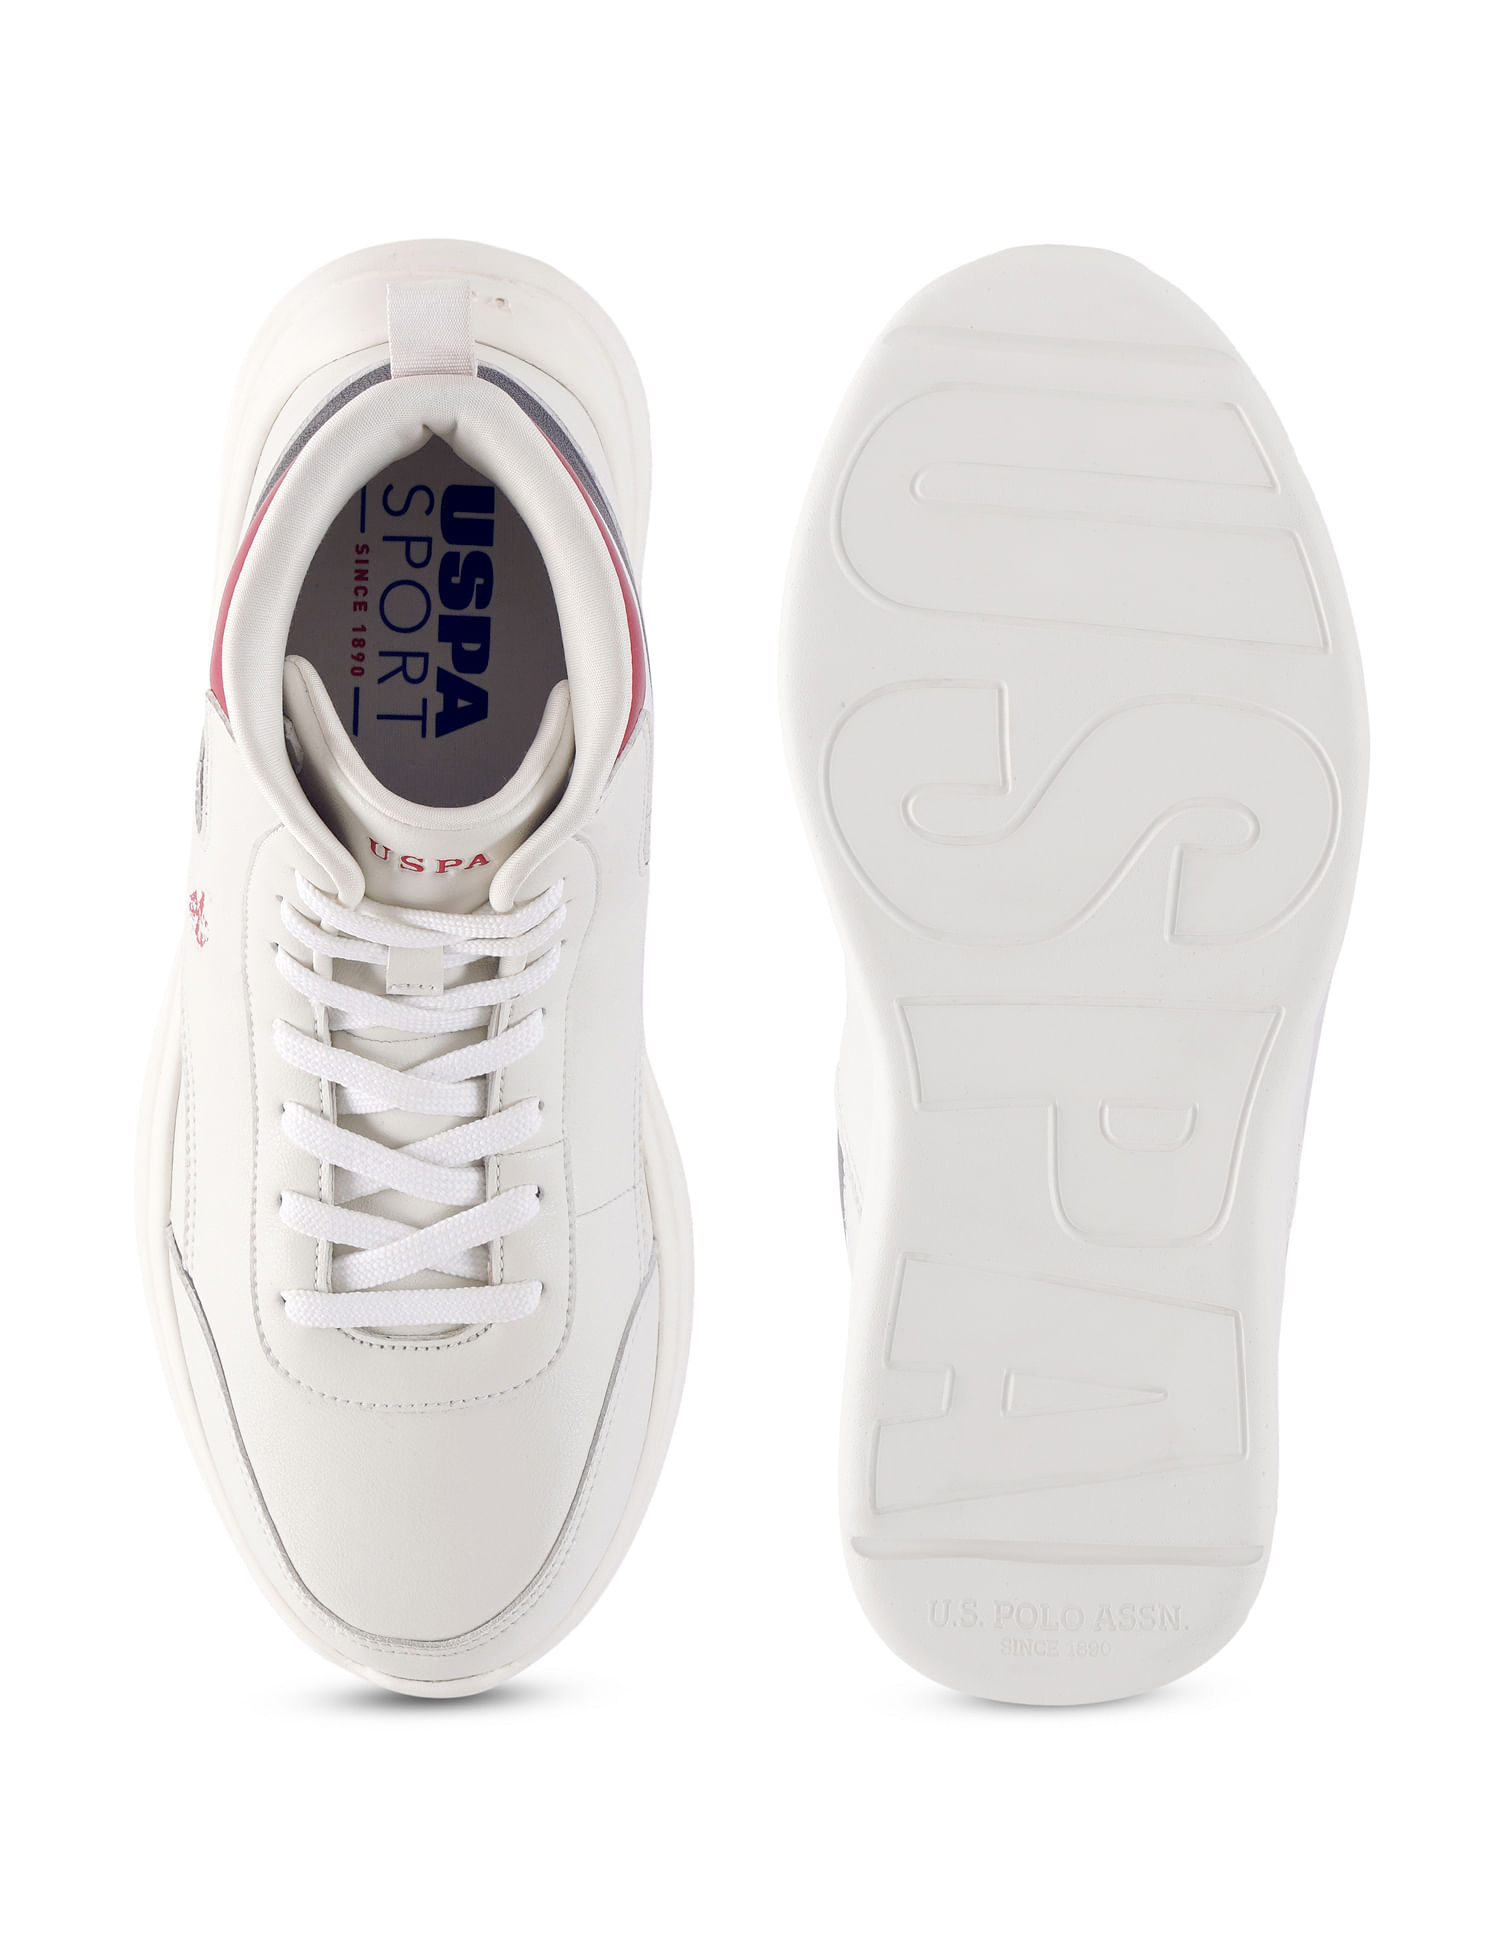 Buy U.S. Polo Assn. Round Toe Linetti High Top Sneakers - NNNOW.com